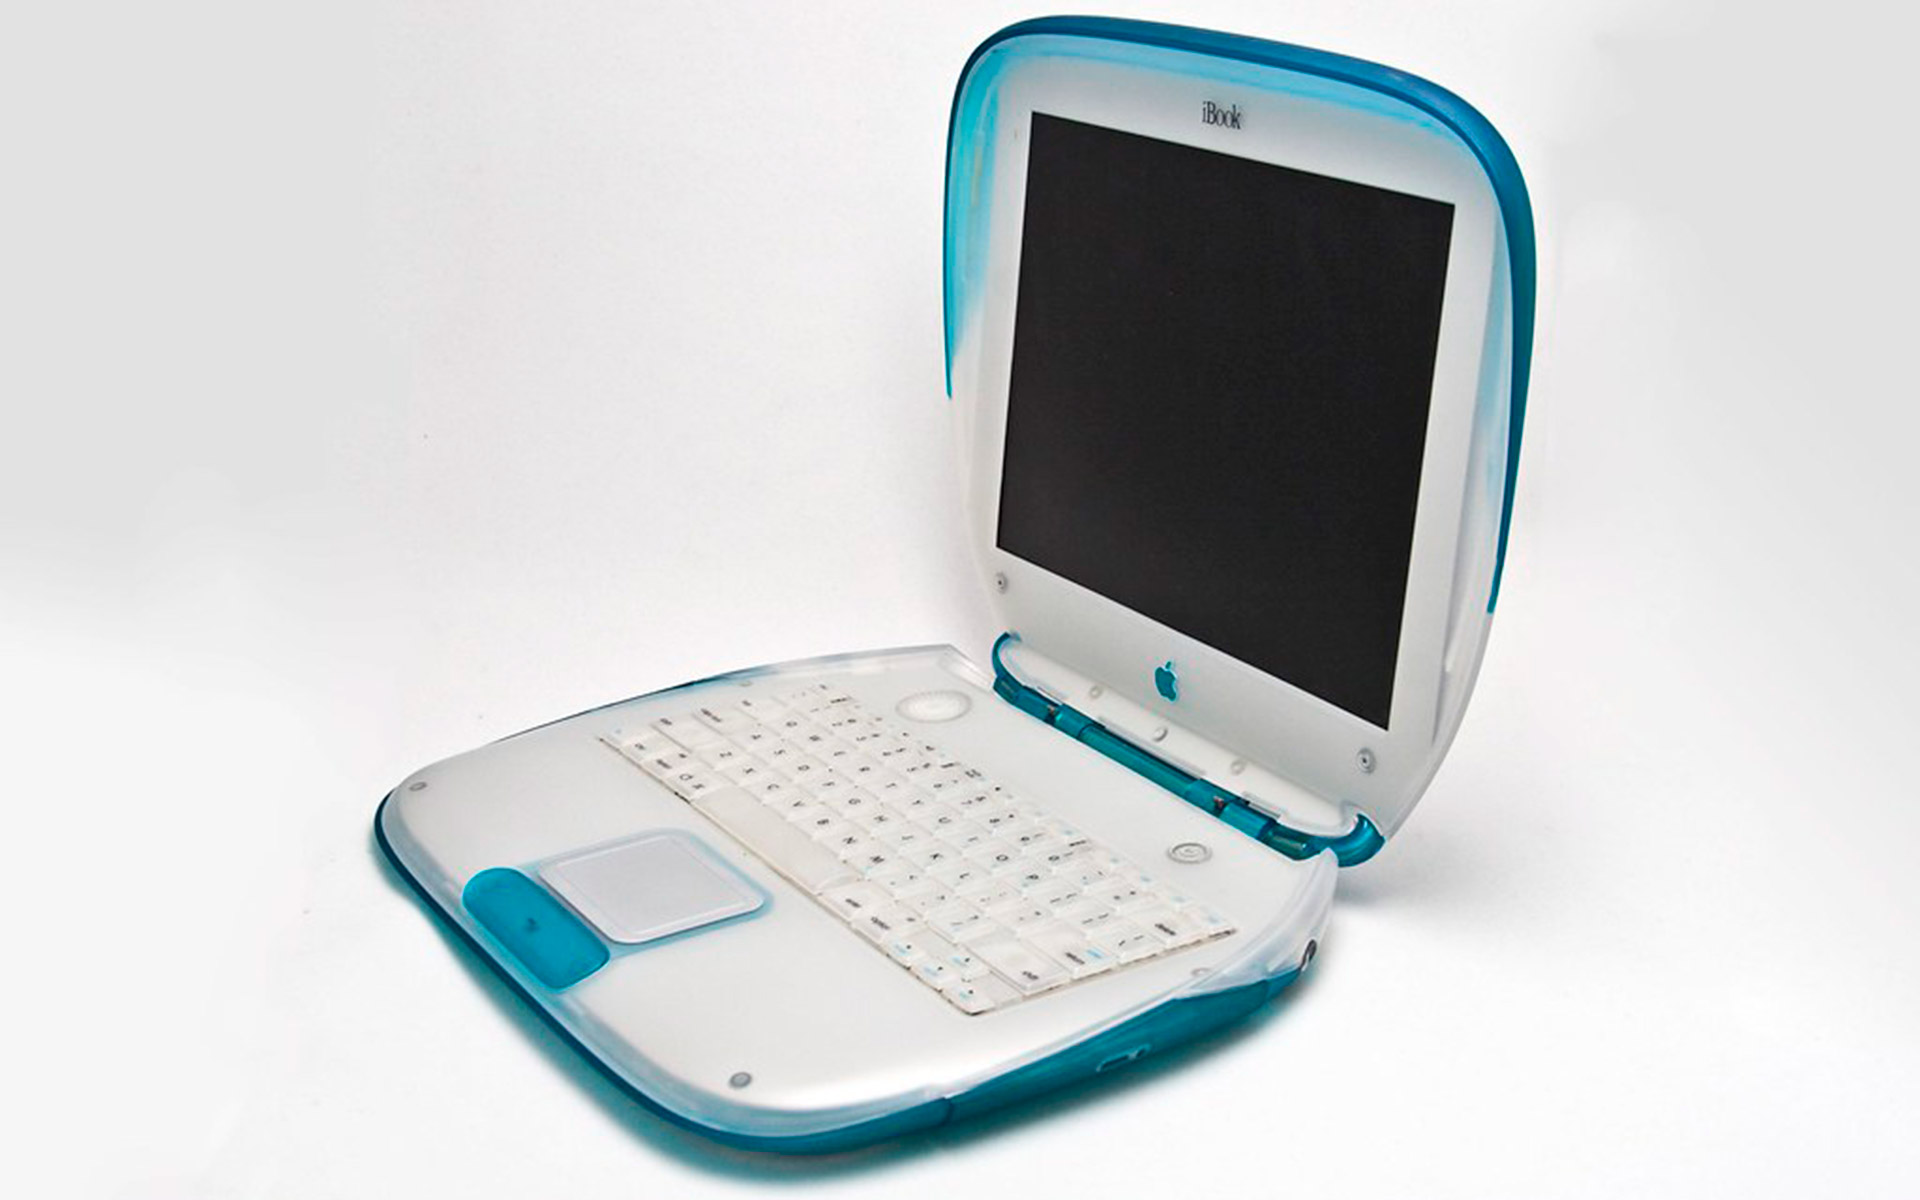 View on the side of the Apple iBook G3 in blue